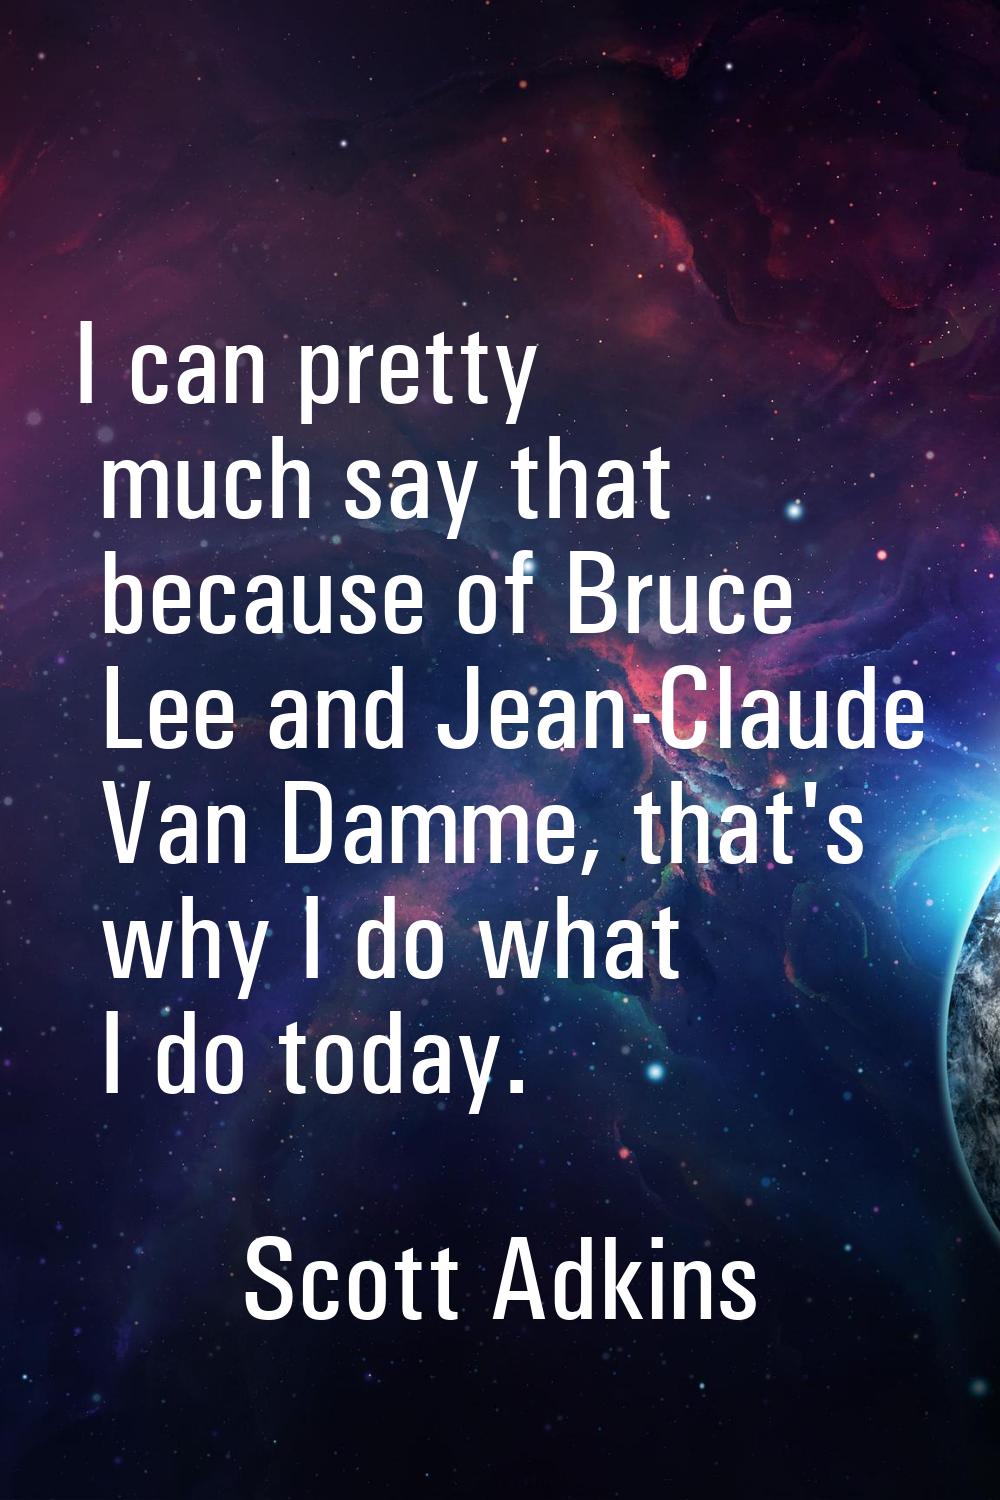 I can pretty much say that because of Bruce Lee and Jean-Claude Van Damme, that's why I do what I d